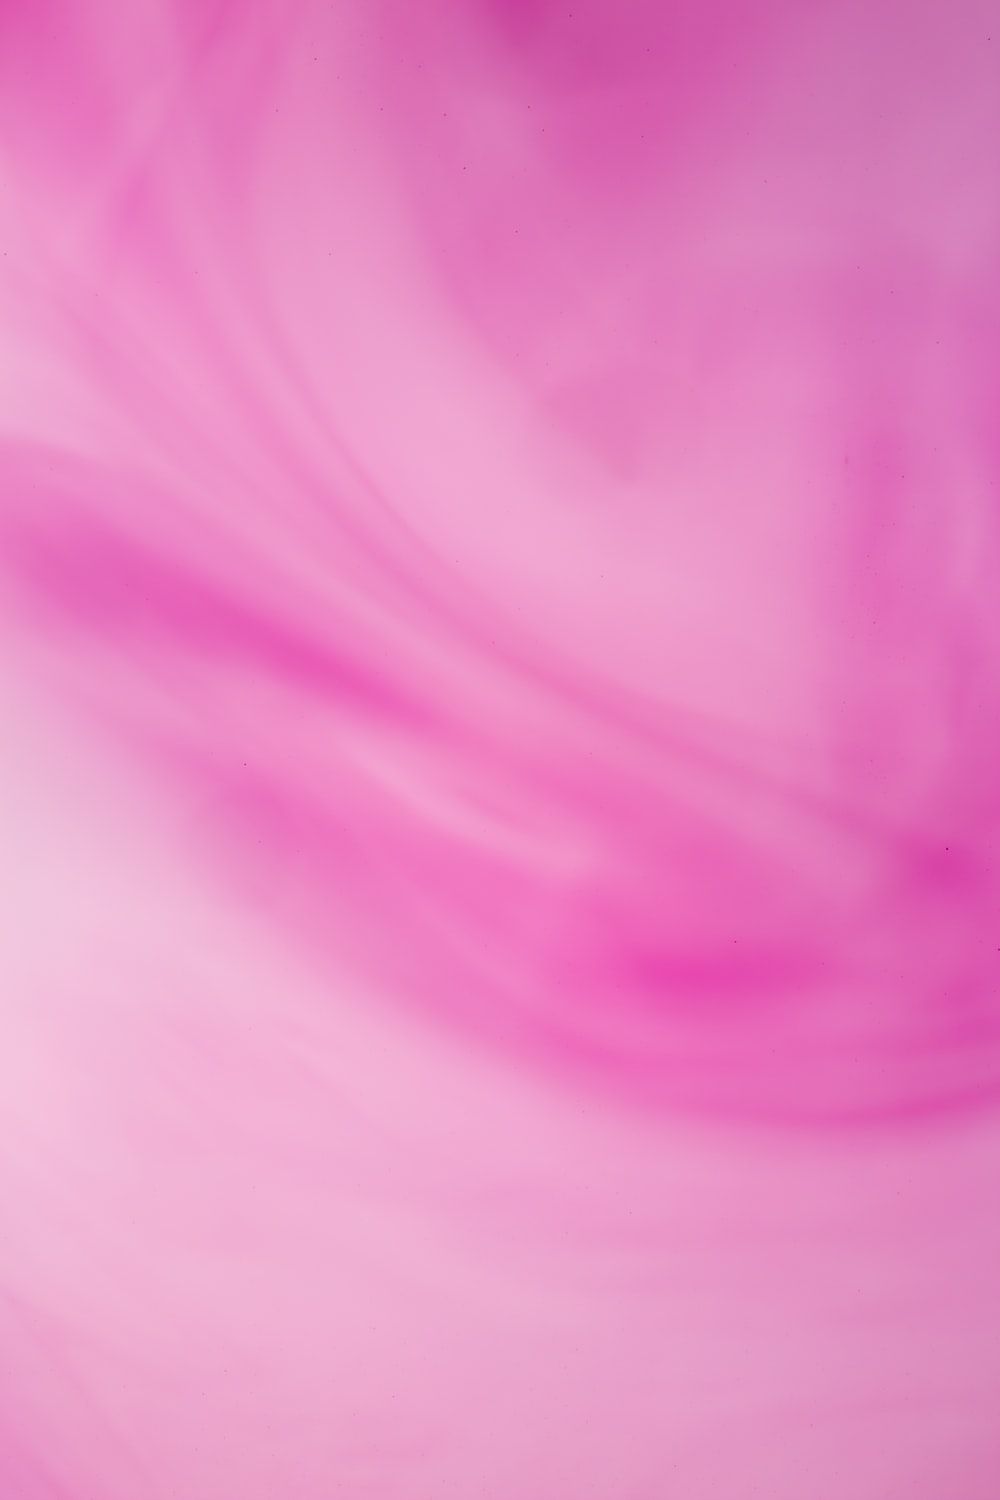 Magenta Background Picture. Download Free Image